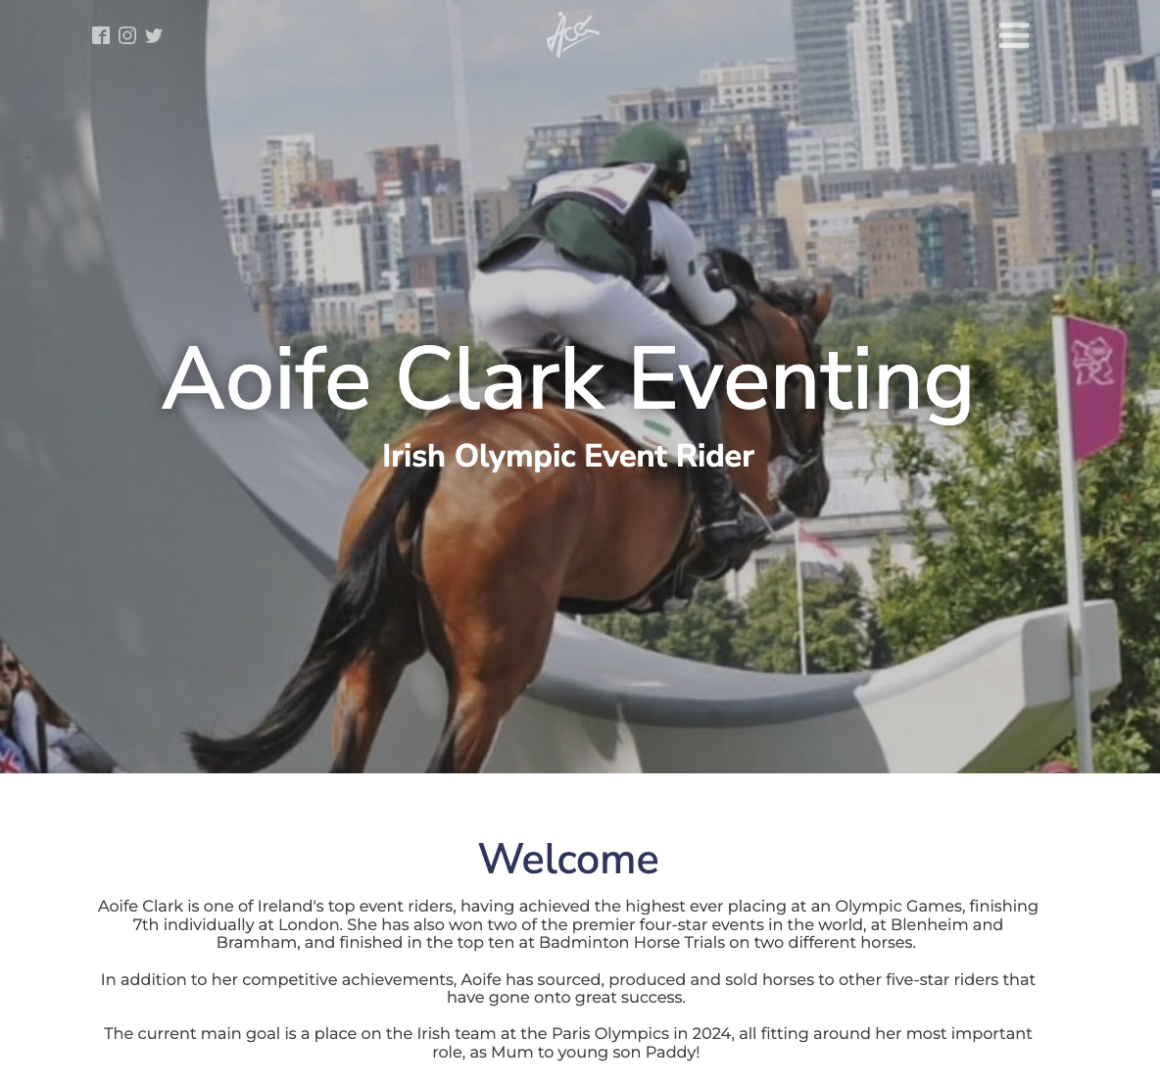 Web design for Aoife Clark eventing